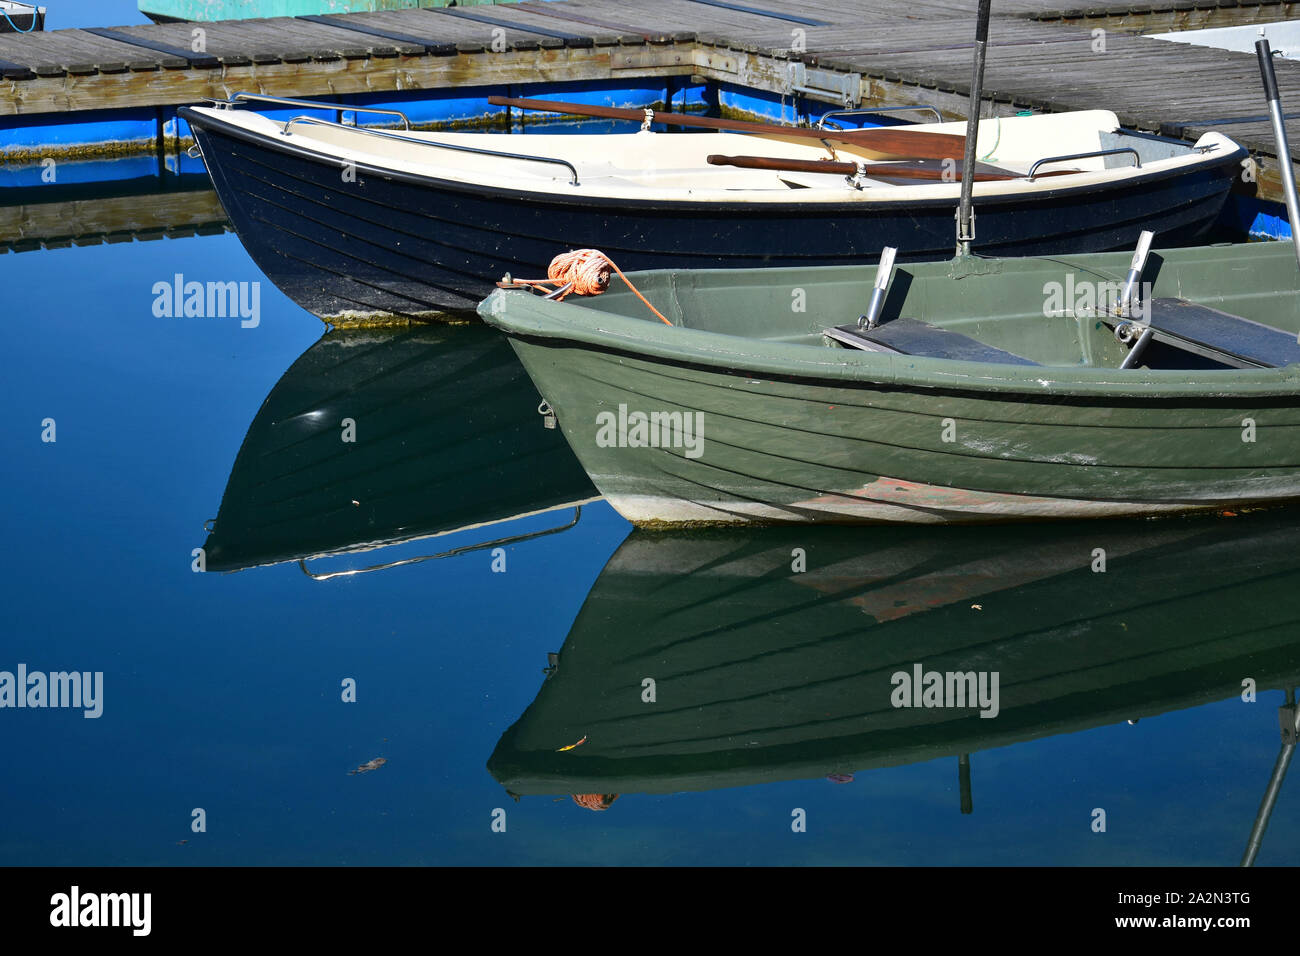 Two angler boats in a lake, one green and one black, reflecting in the water. Stock Photo